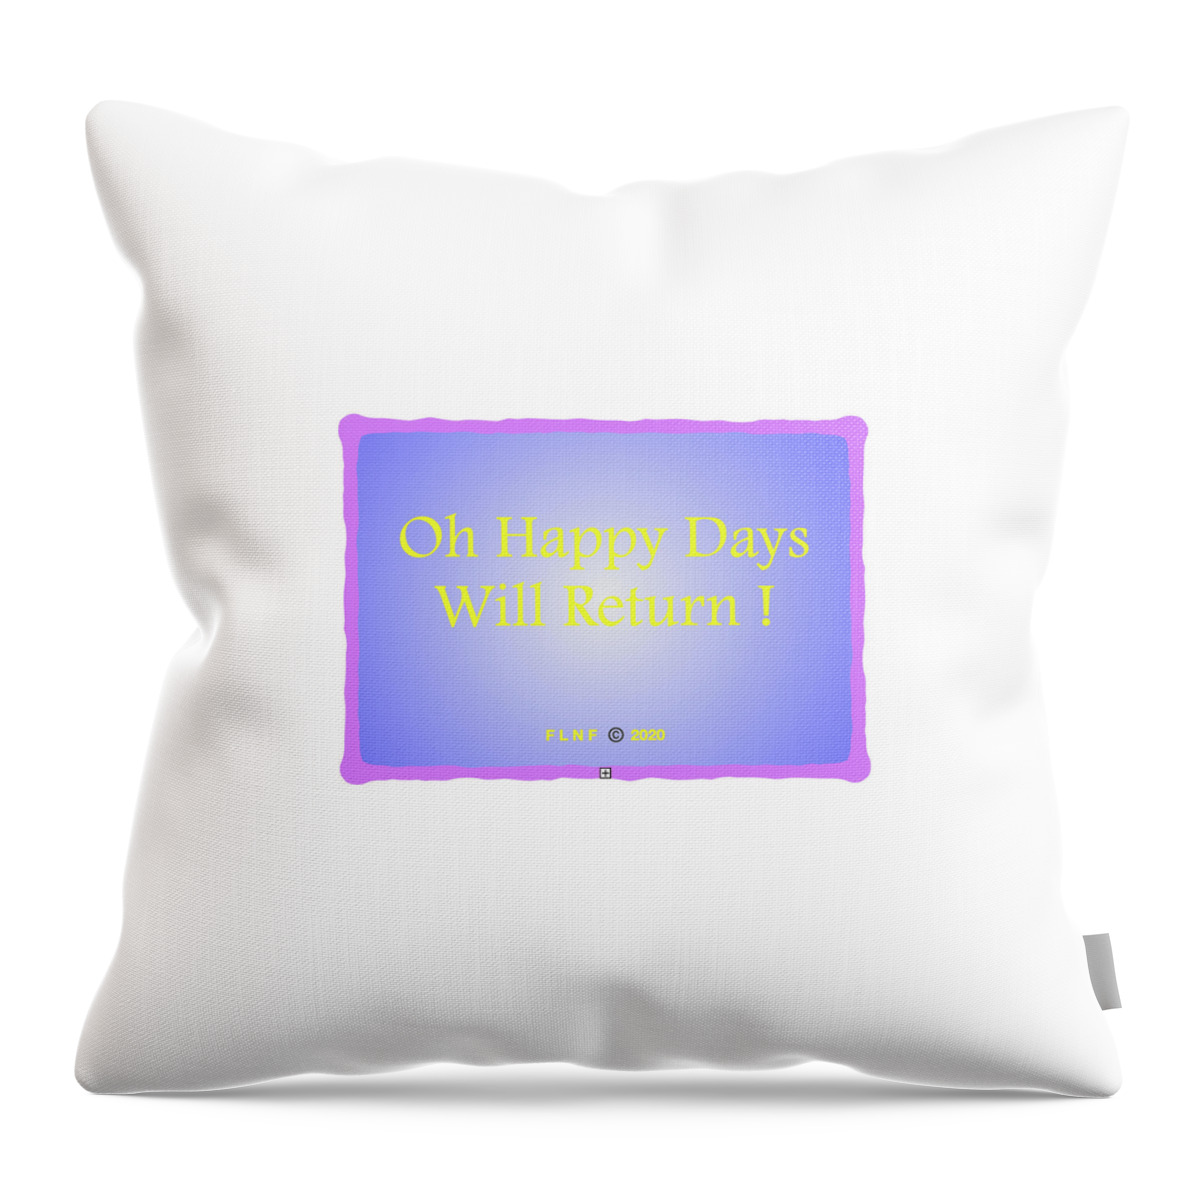 Covid-19 Throw Pillow featuring the photograph COVID-19 Face Mask No 14 by Fabiola L Nadjar Fiore